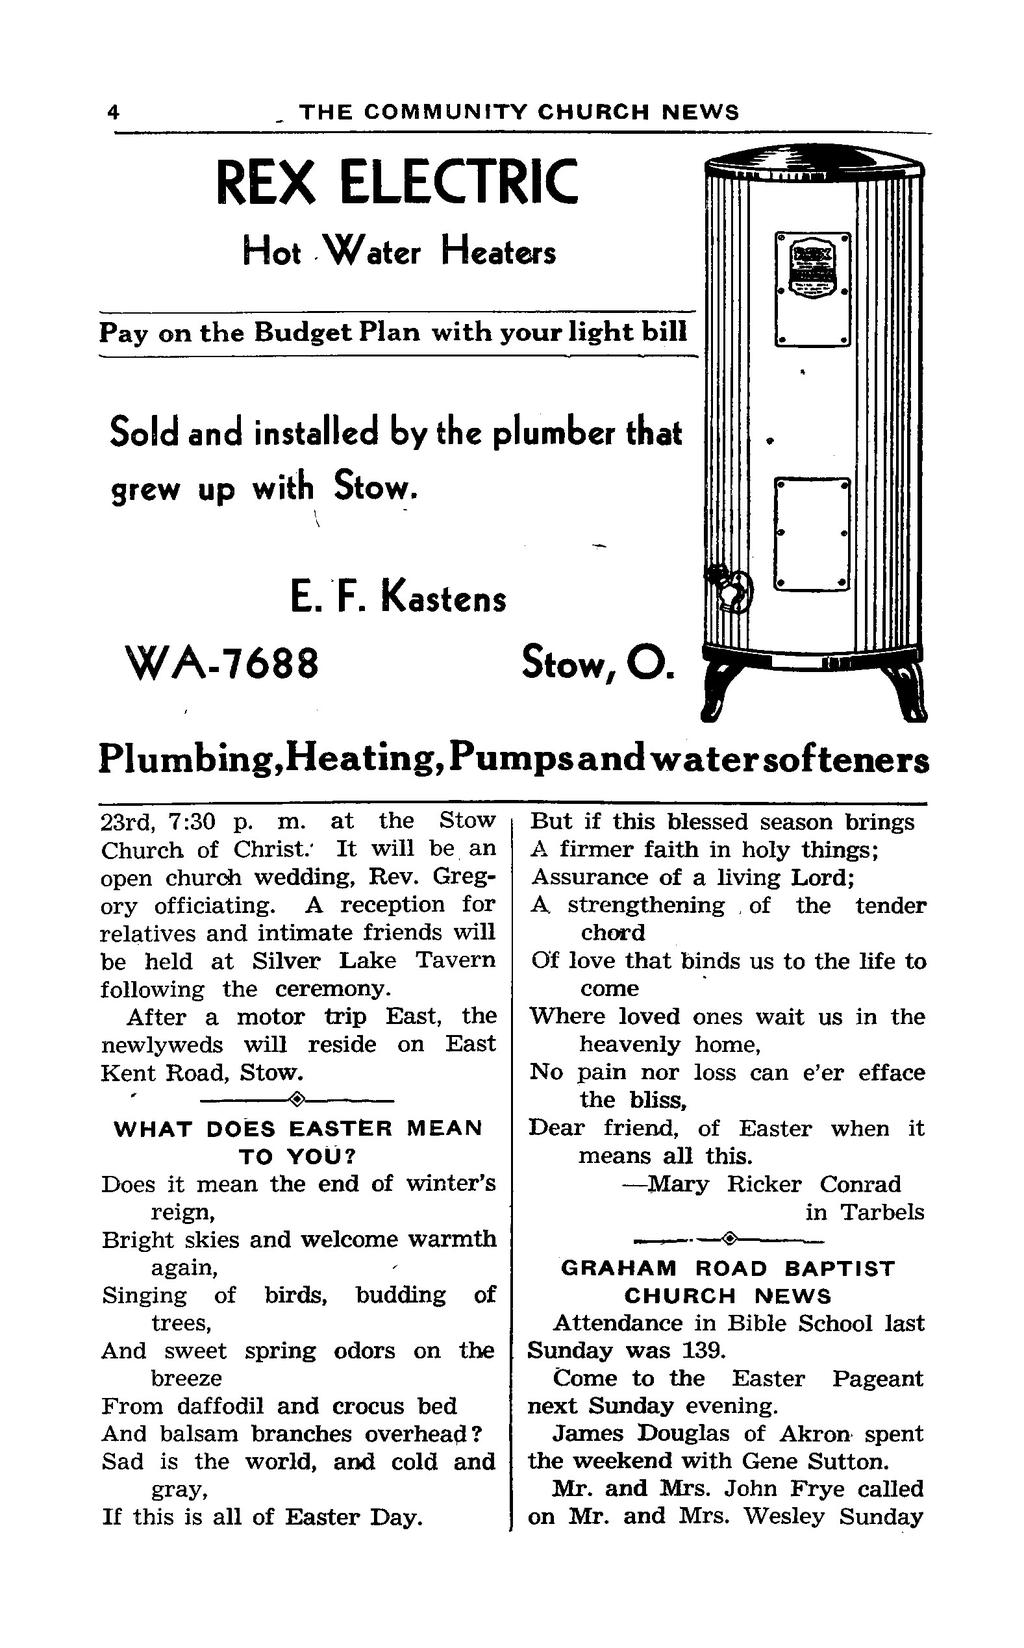 8 THE COIWNIUNITY CHURCH NEWS 3 REX ELECTRIC Hot Water Heaters Pay on the Budget Plan with your light bill Sold and installed by the plumber that grew up with Stow. E. F. Kastens WA-7688 Stow, O.